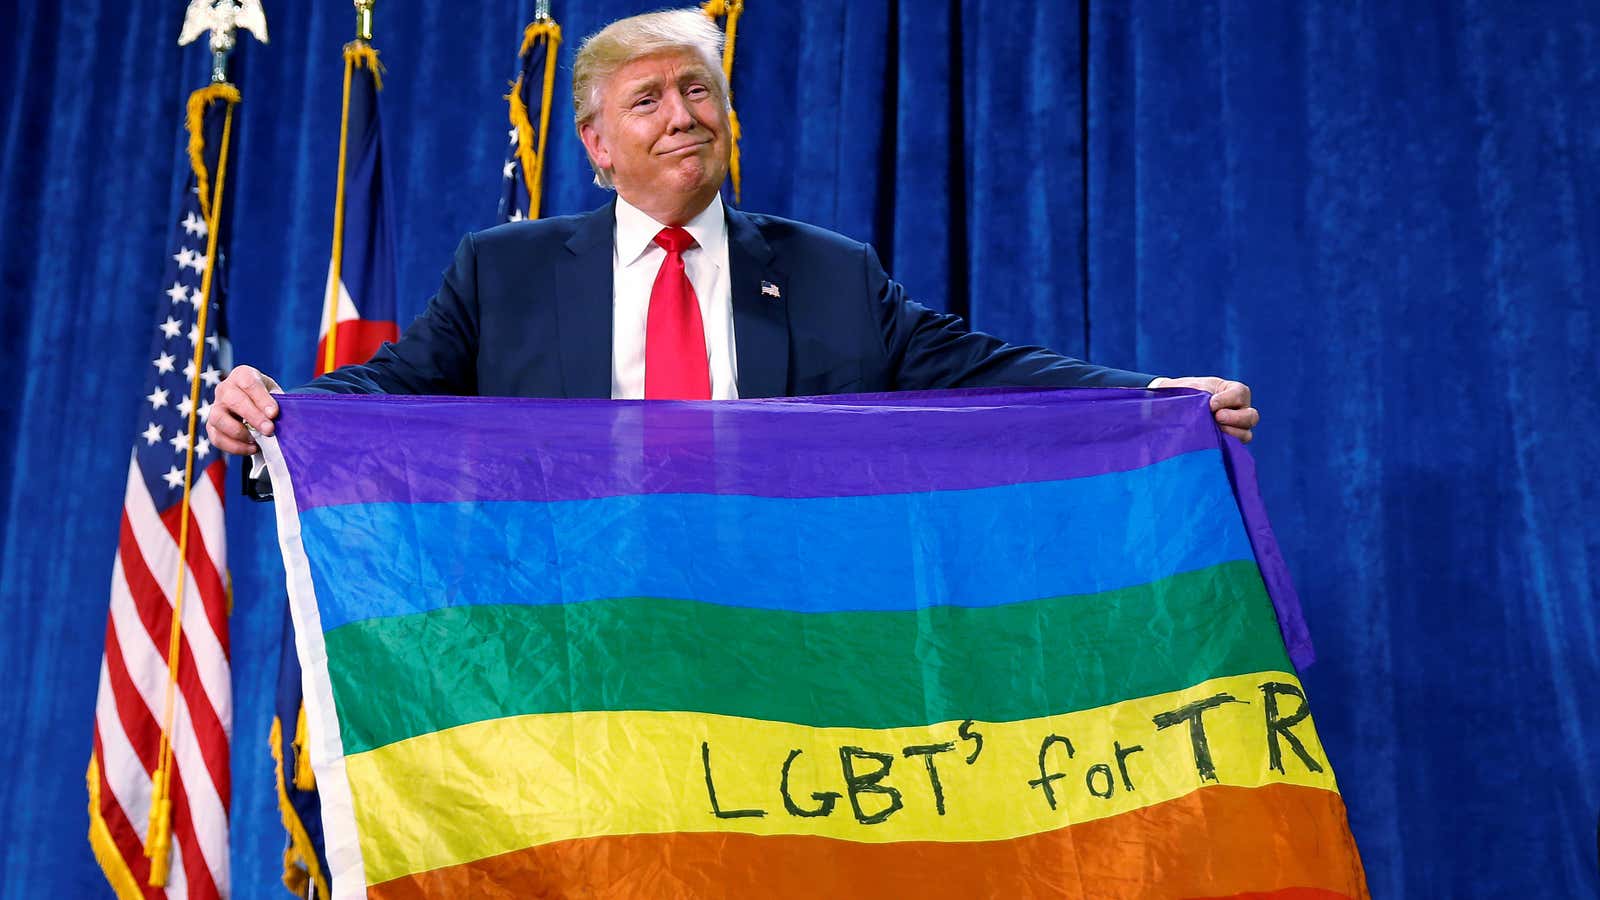 Donald Trump’s “support” of LGBT communities in one image